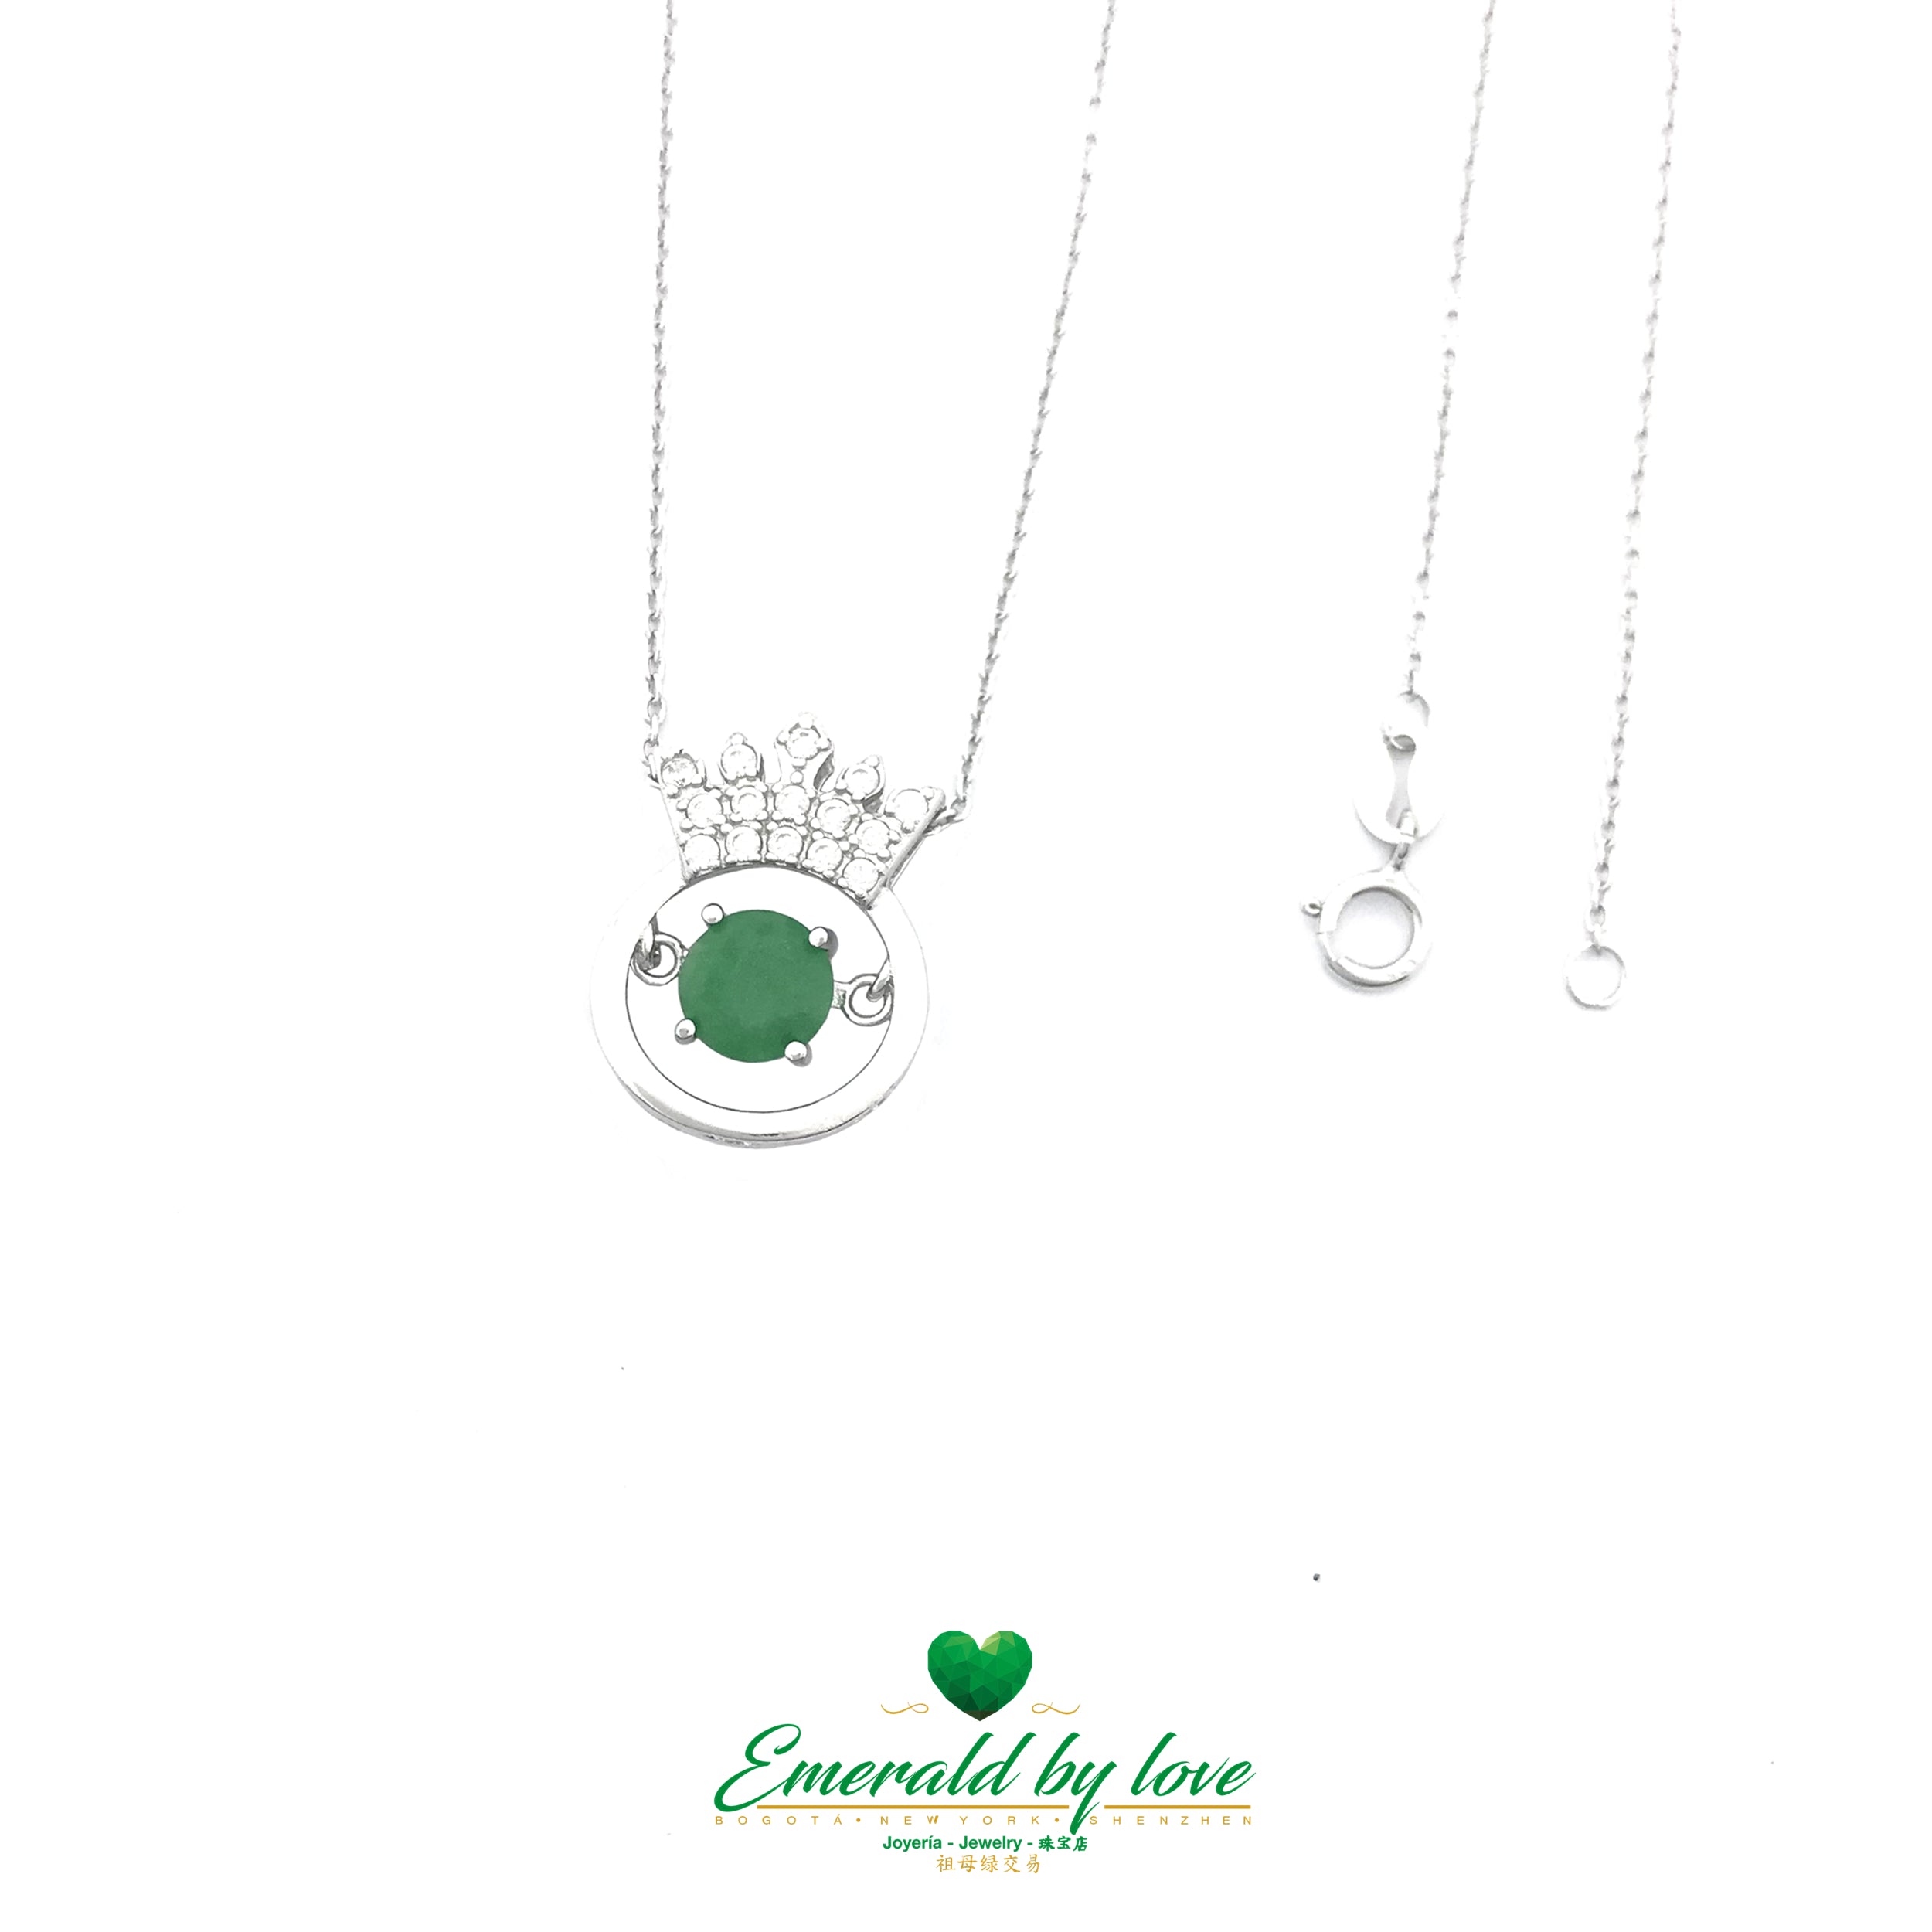 Flat Crown Pendant with Large Central Round Emerald